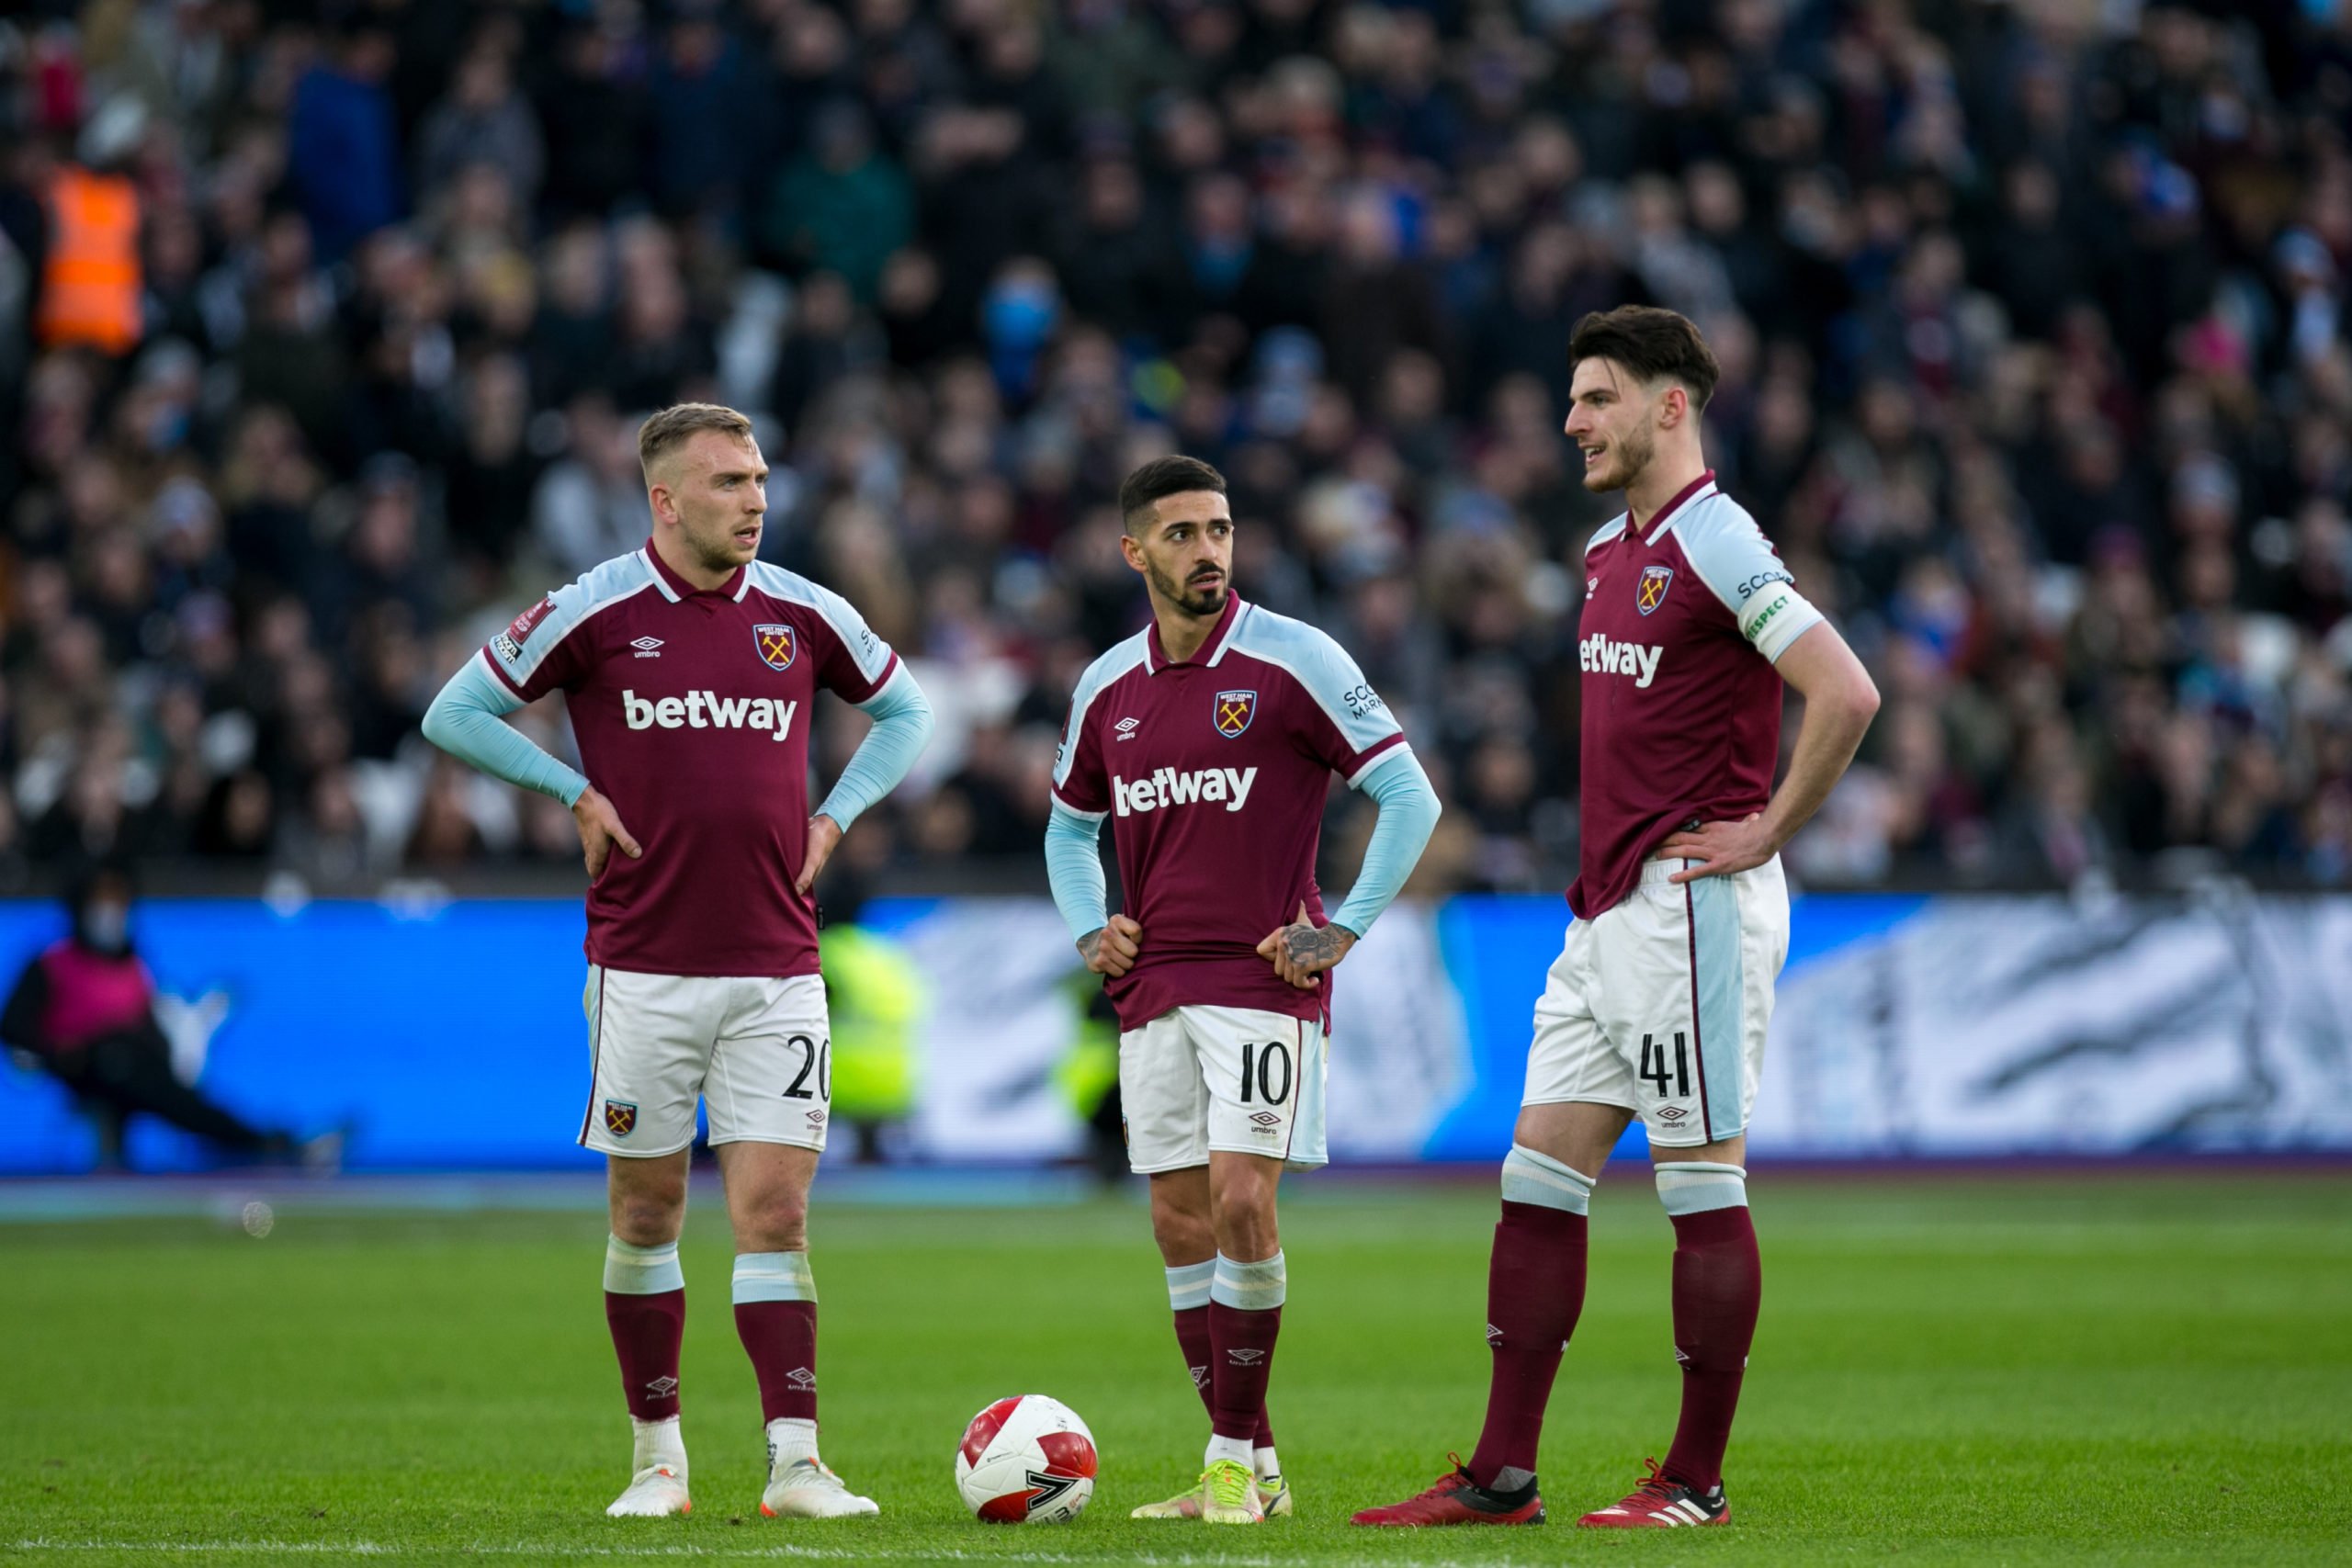 Declan Rice shares what he thought was going to happen just before Jarrod Bowen scored against Leeds